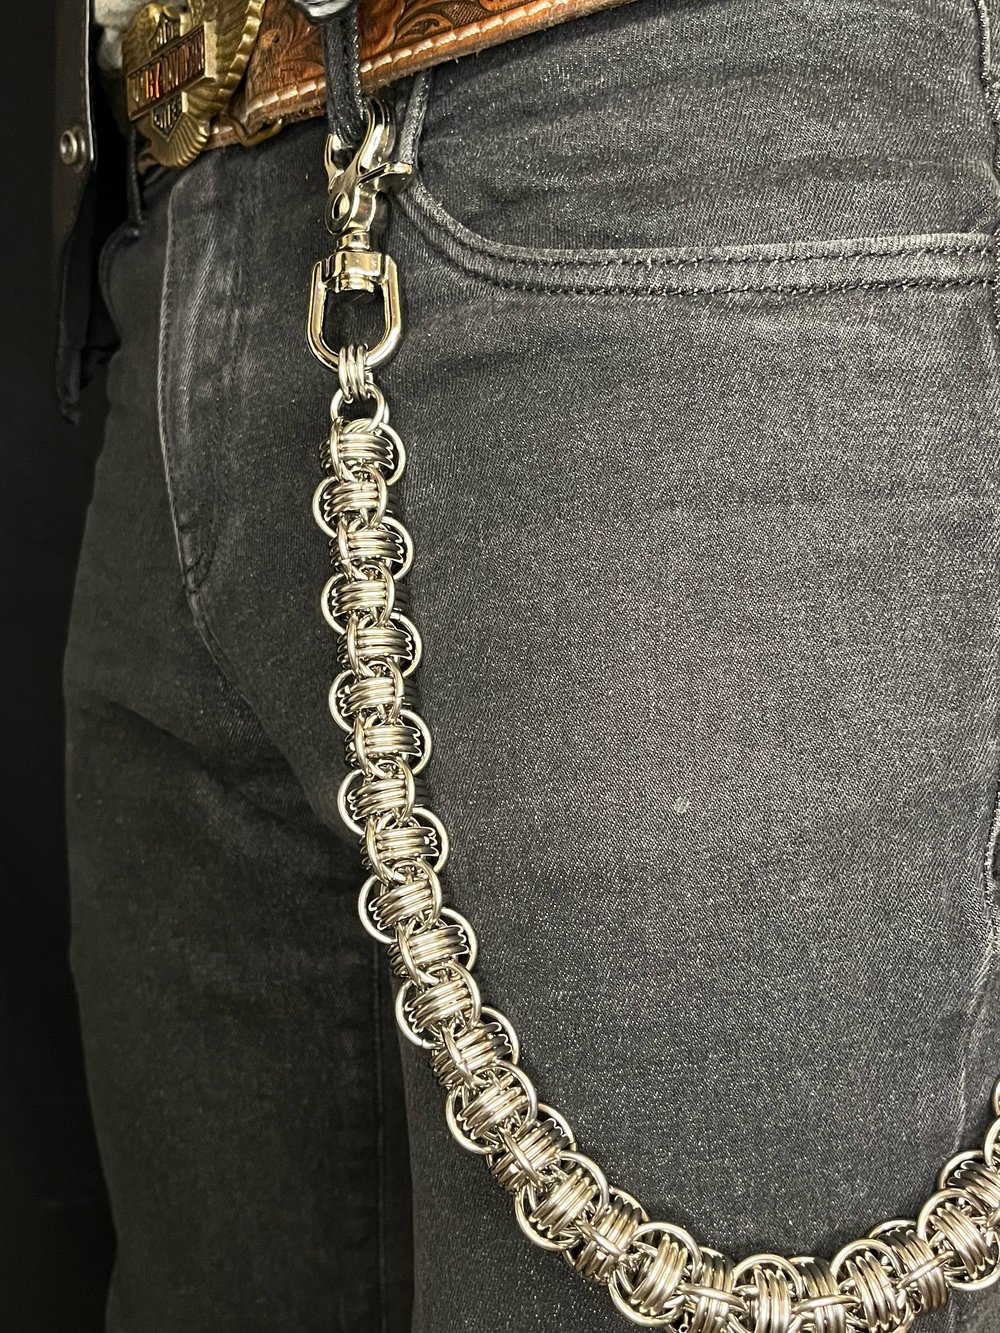 Bore Worm Wallet Chain